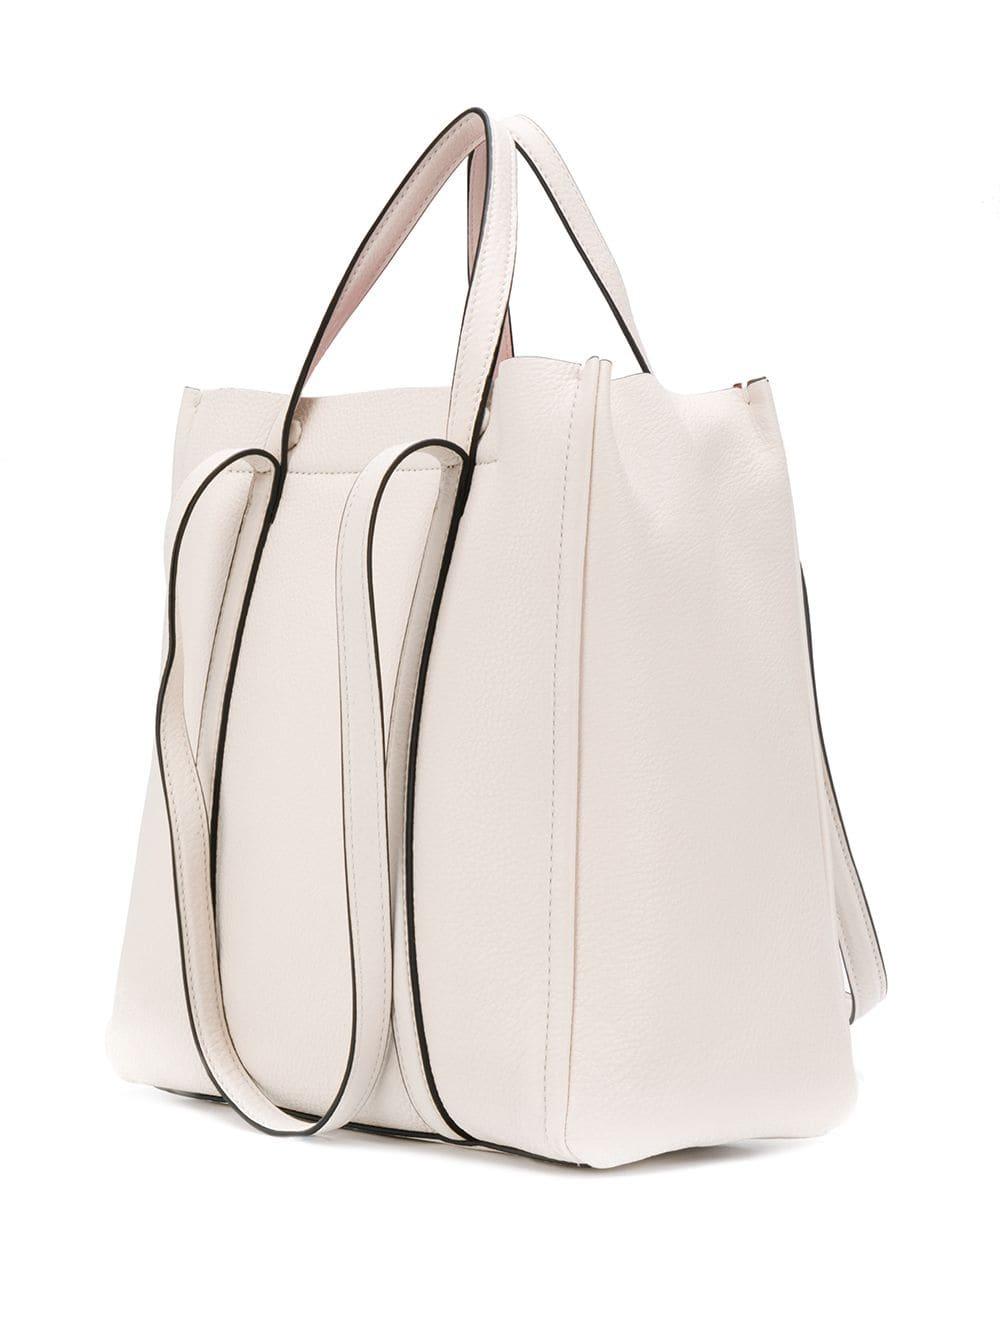 White Marc Jacobs Bags :: Keweenaw Bay Indian Community